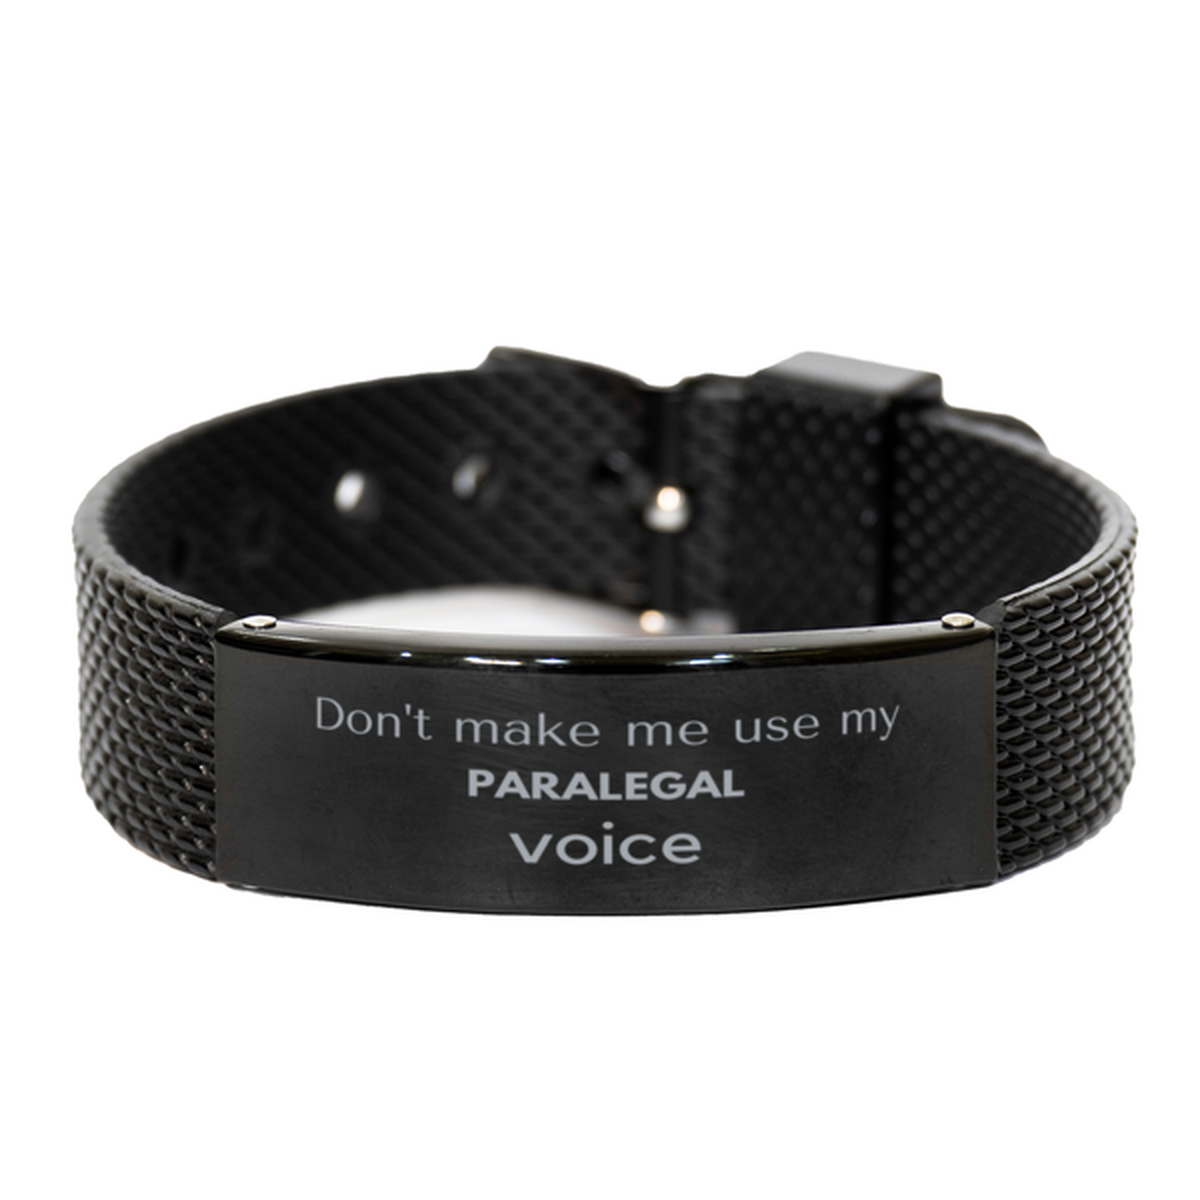 Don't make me use my Paralegal voice, Sarcasm Paralegal Gifts, Christmas Paralegal Black Shark Mesh Bracelet Birthday Unique Gifts For Paralegal Coworkers, Men, Women, Colleague, Friends